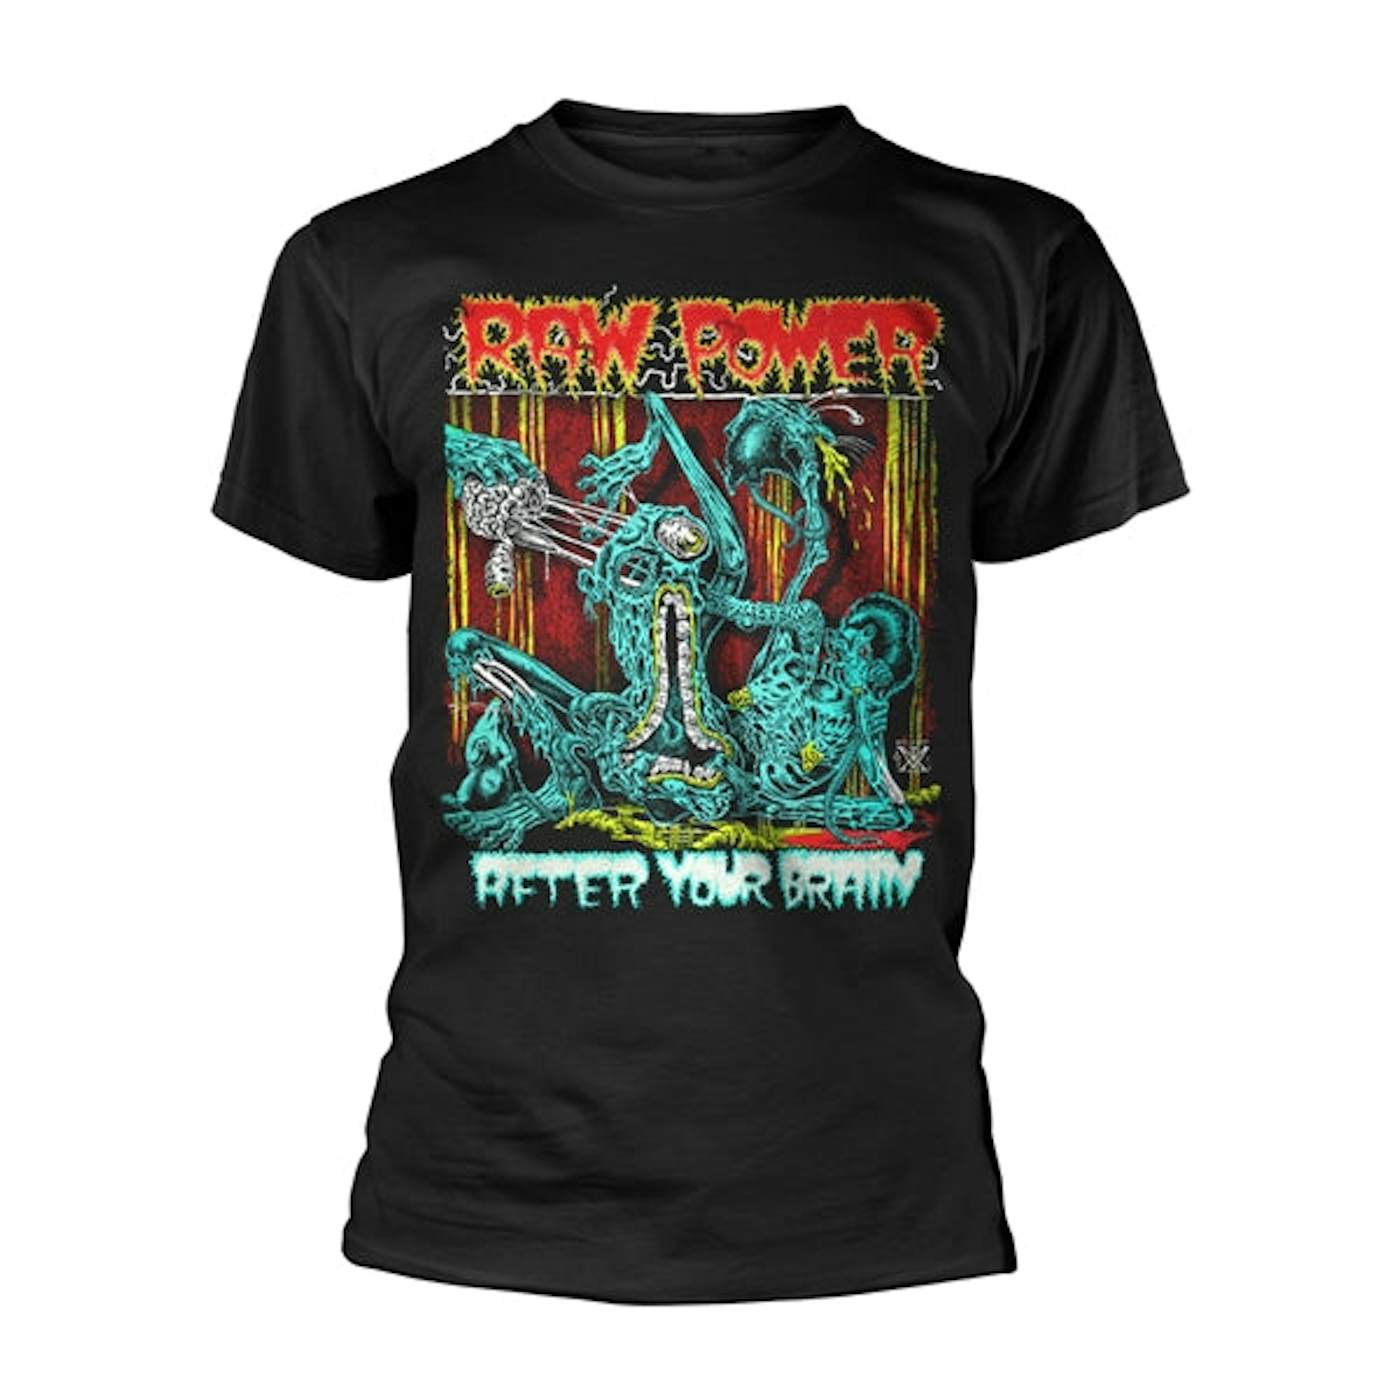 Raw Power T Shirt - After Your Brain